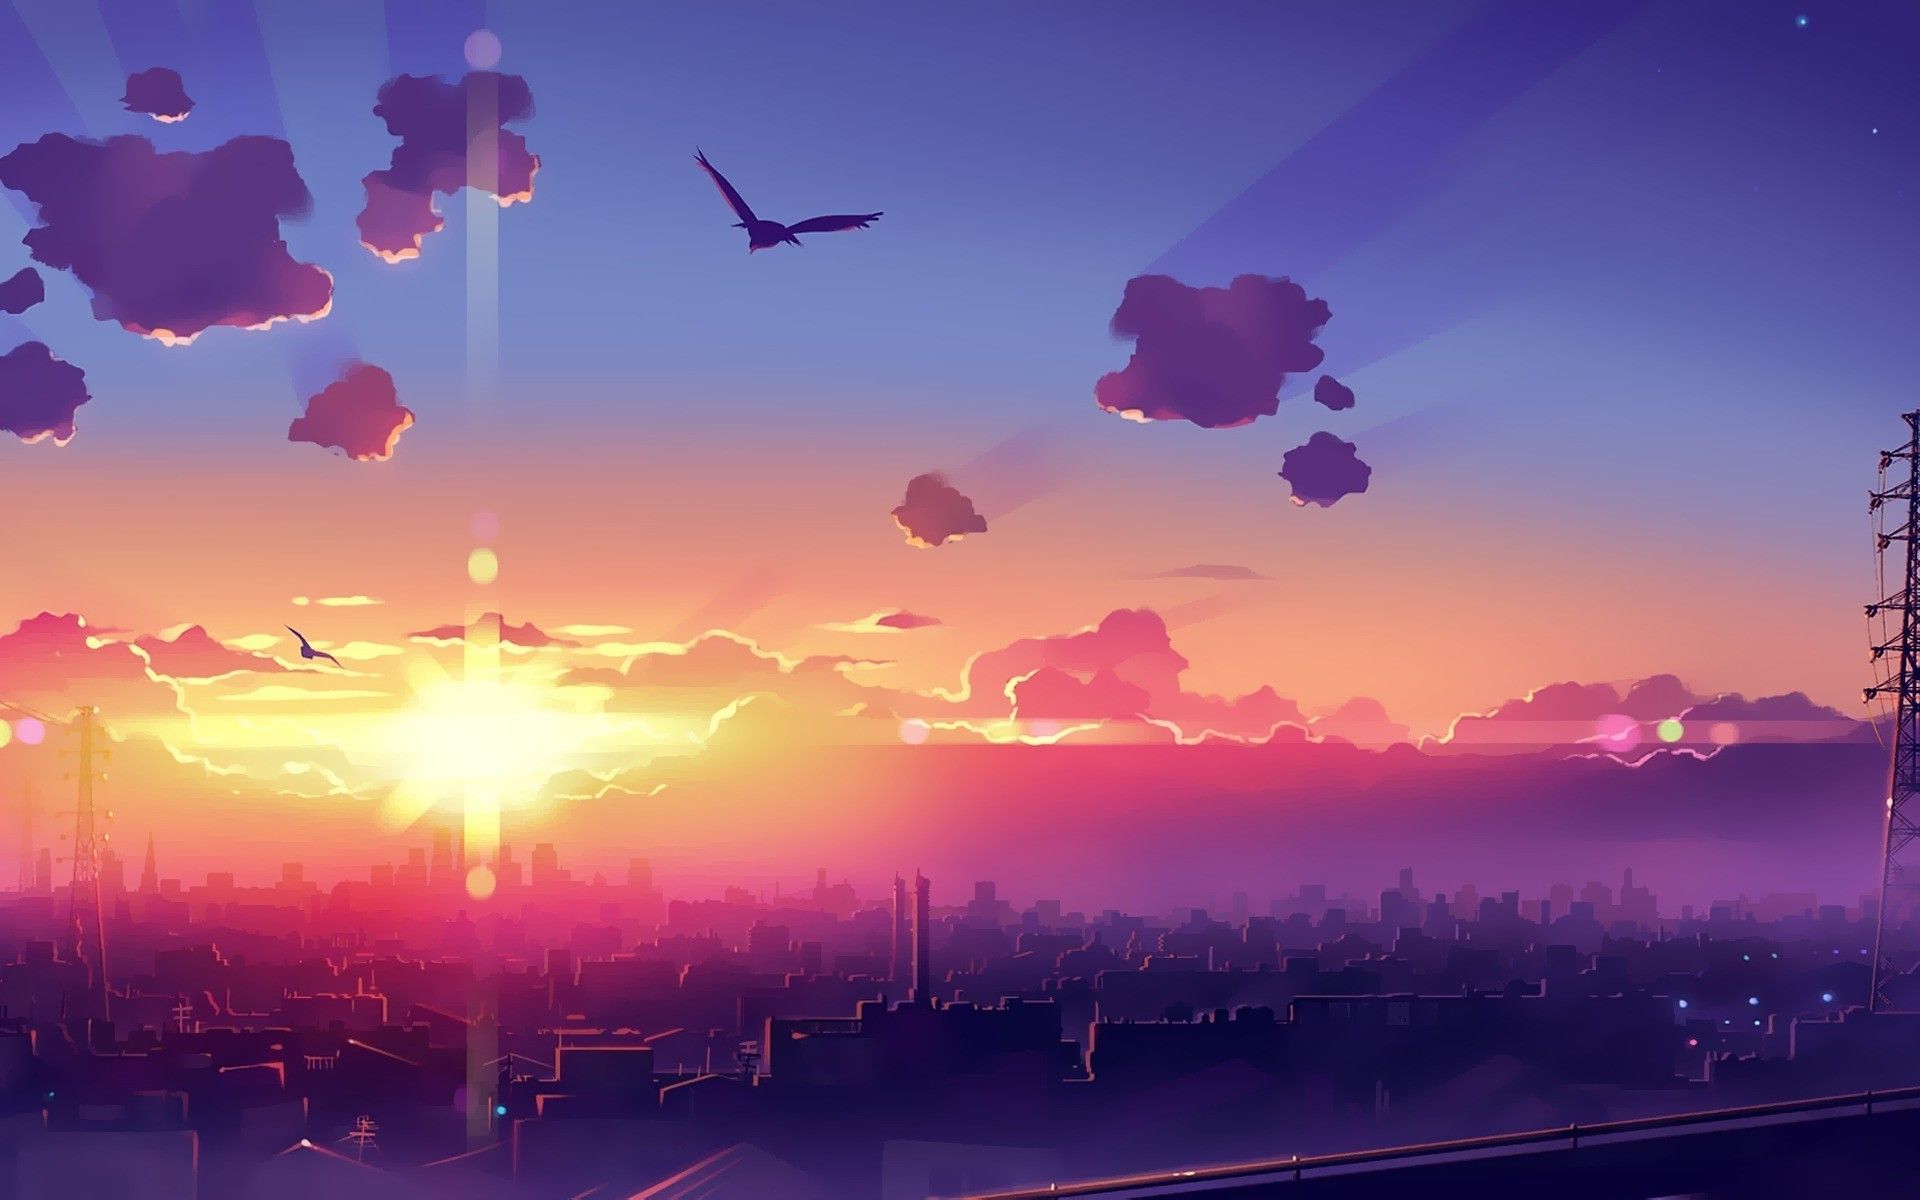 A sunset with clouds and birds in the sky - Anime sunset